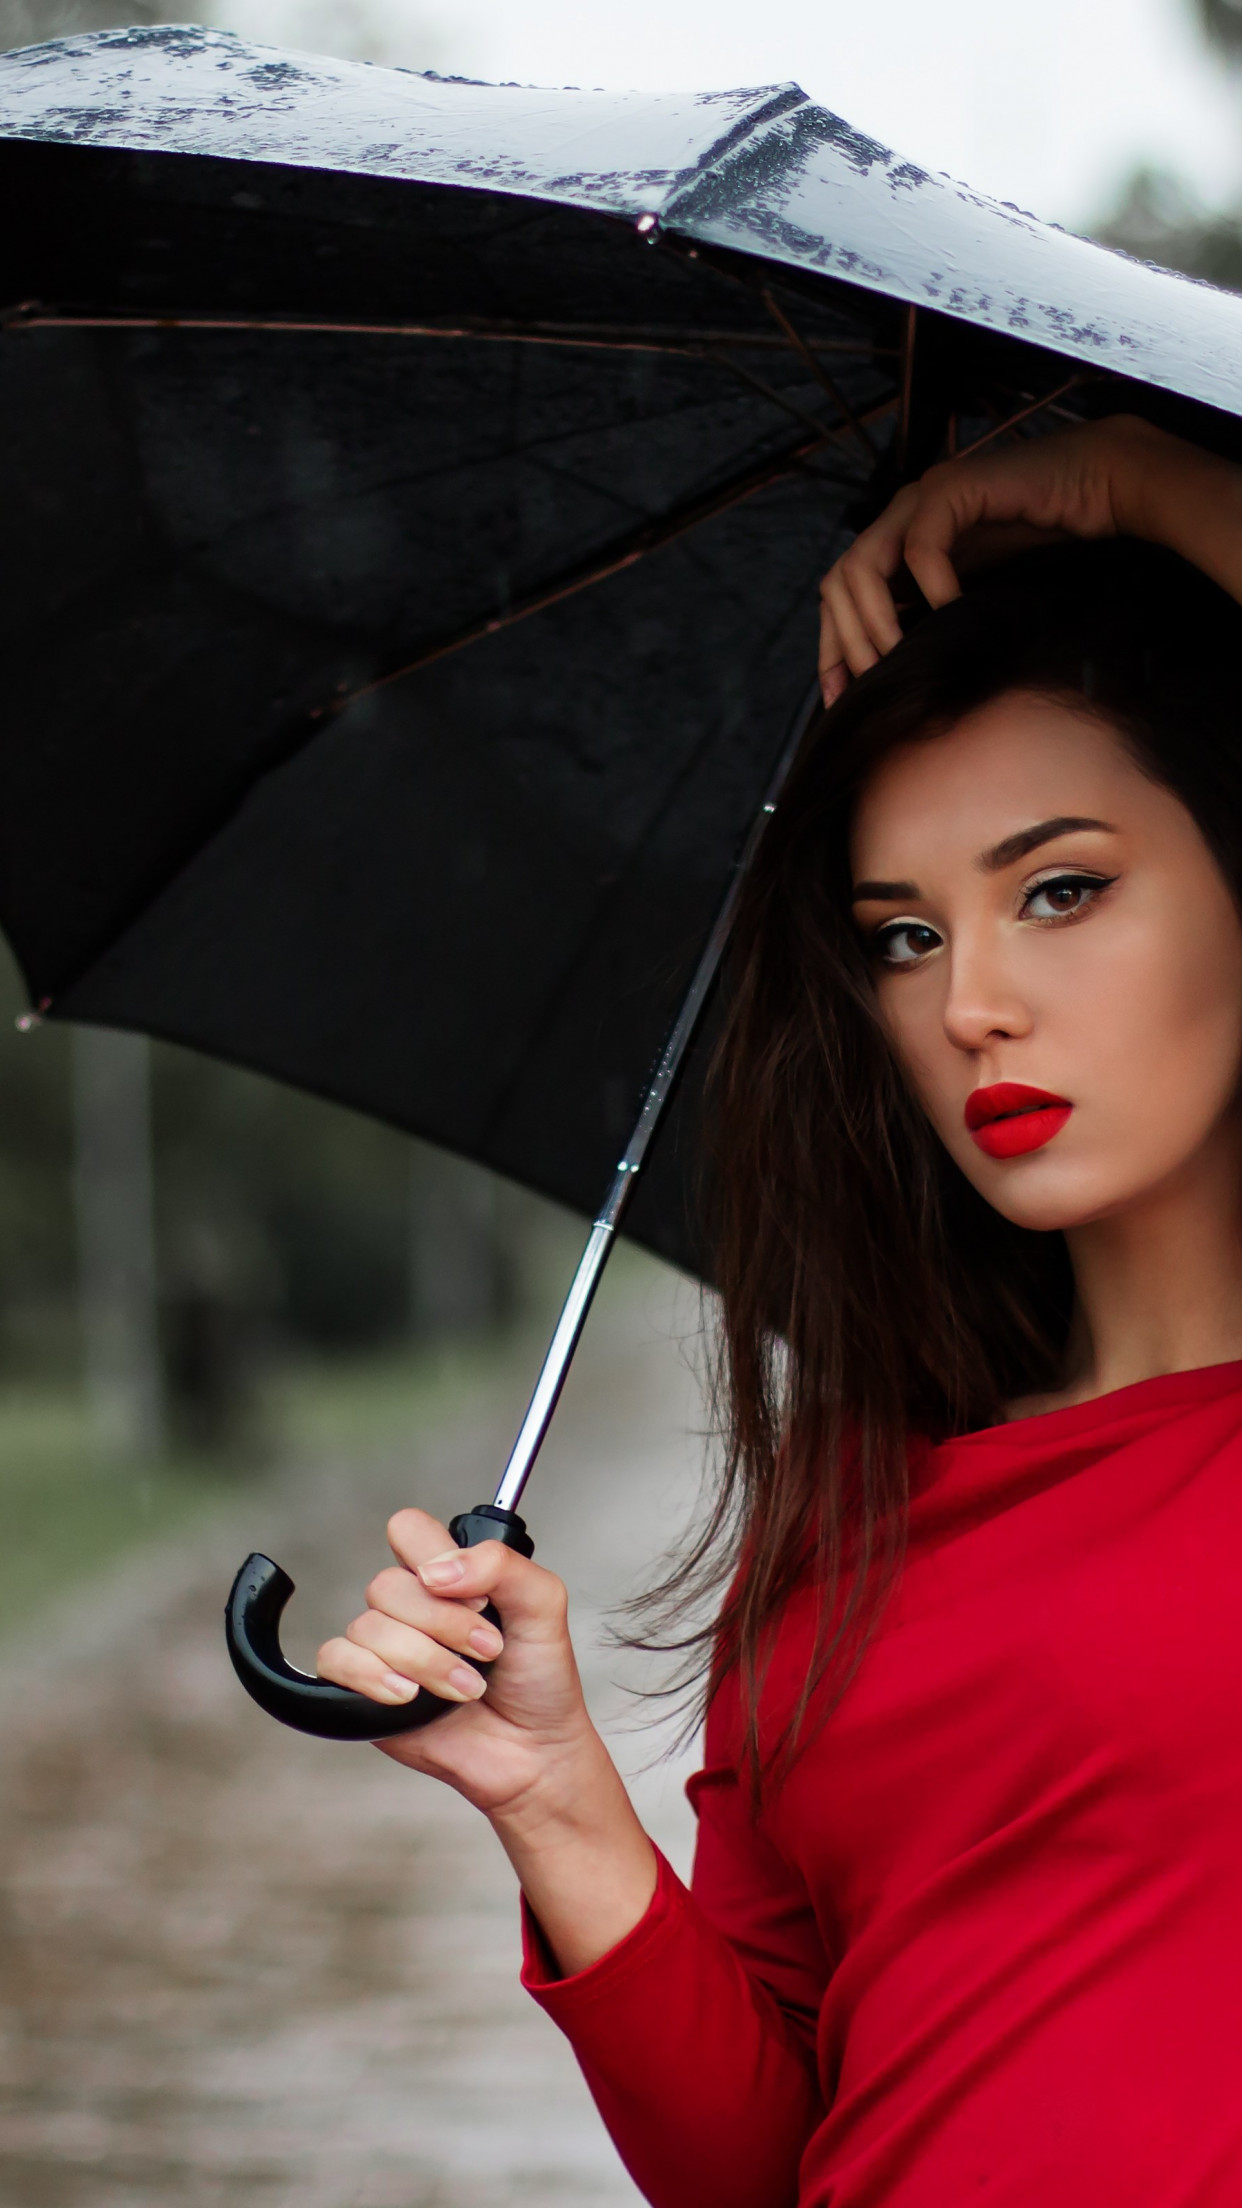 Beauitful girl in a rainy day wallpaper 1242x2208